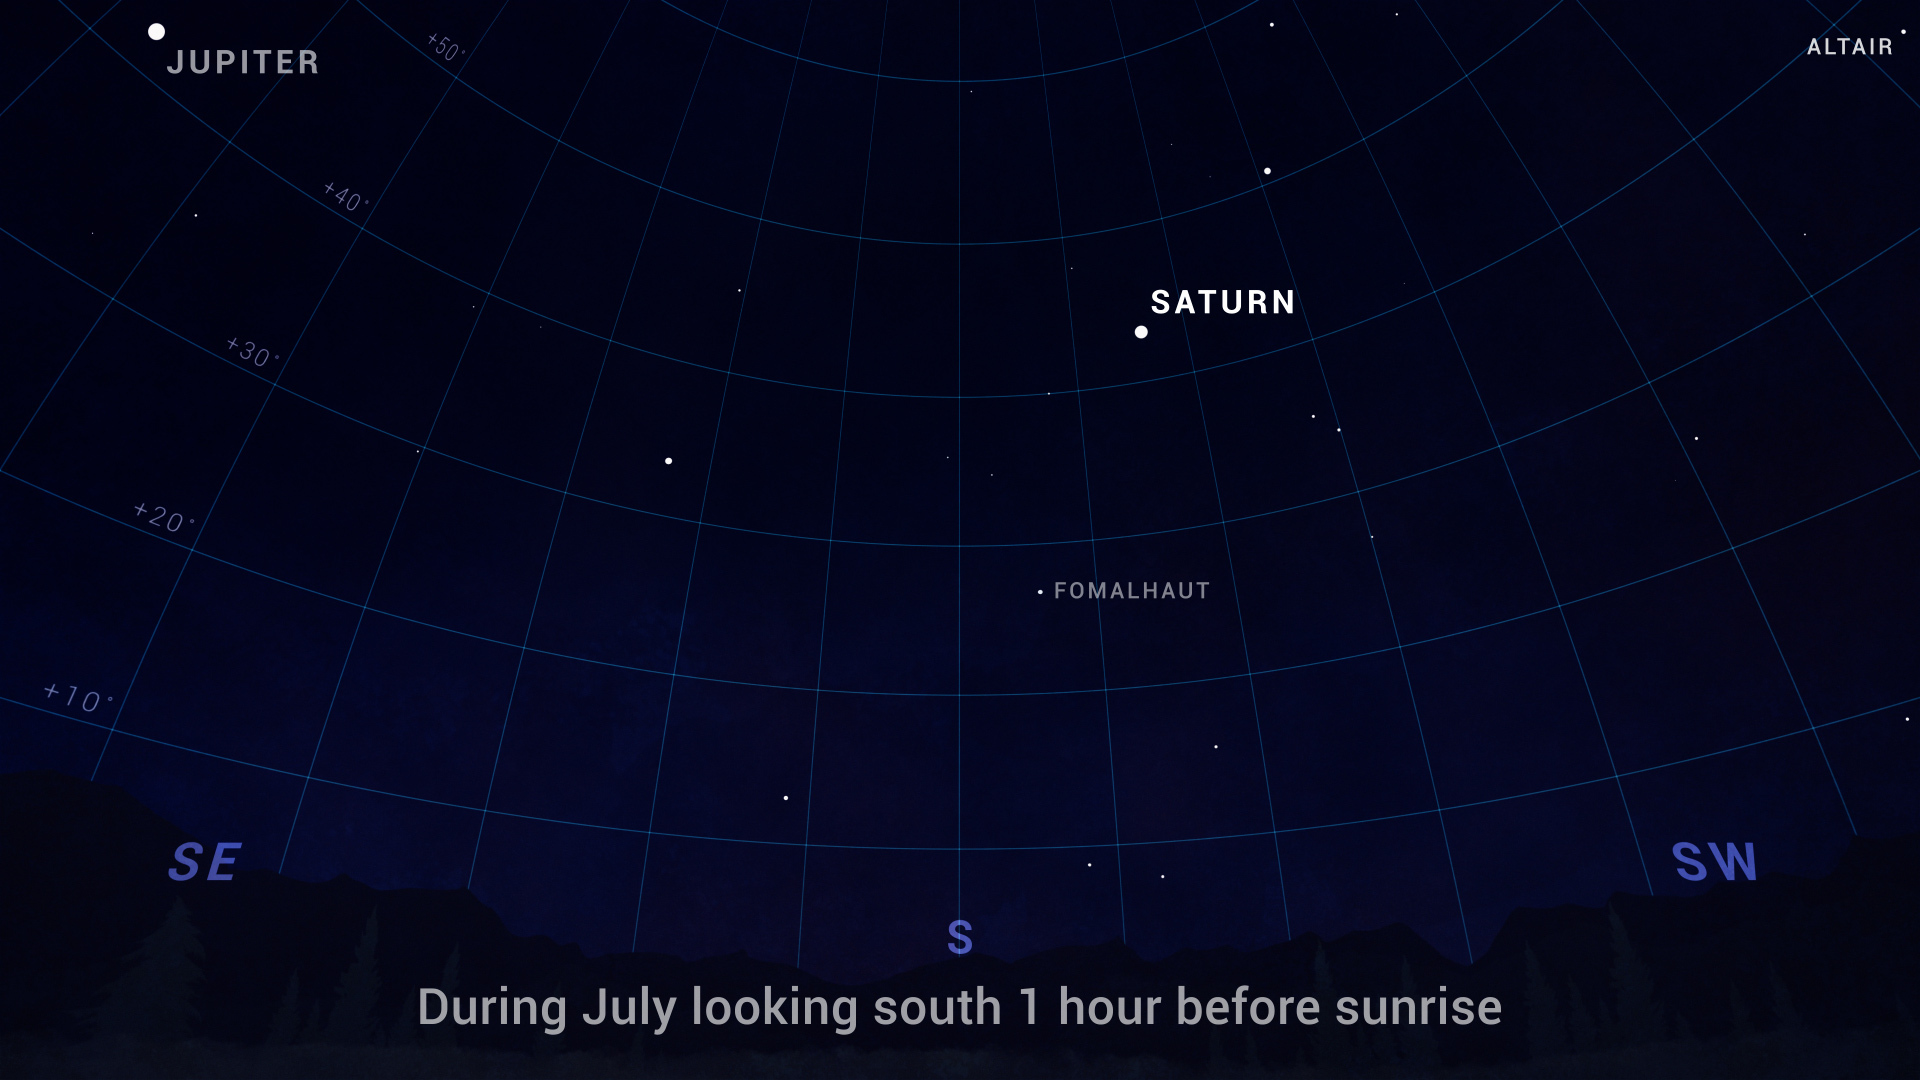 Sky chart showing Saturn and Fomalhaut in the early morning sky in July. Credit: NASA/JPL-Caltech